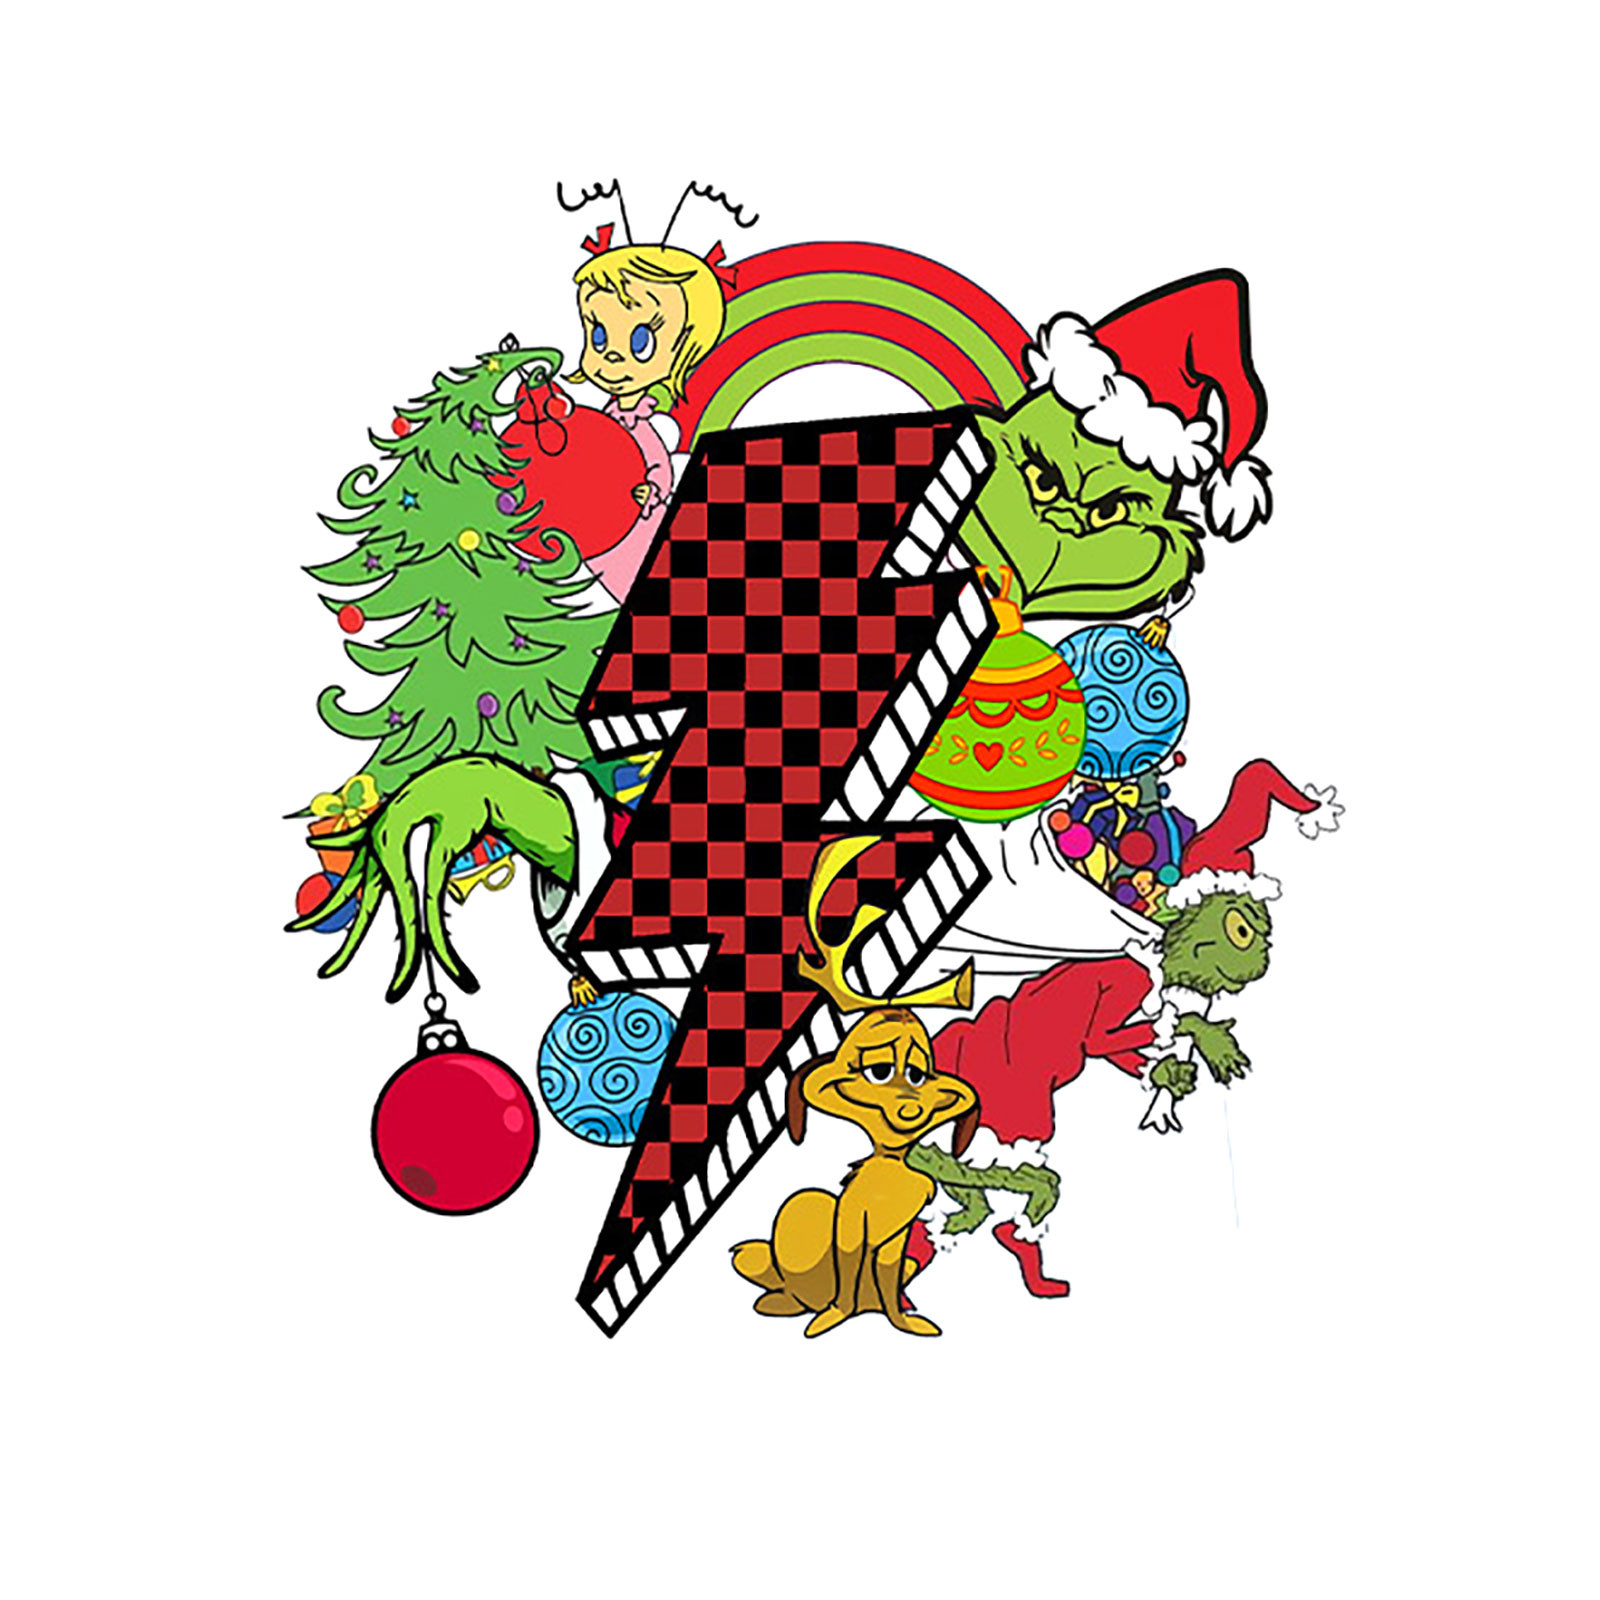 Grinch Christmas Decorations,Christmas Iron On Transfer Heat Transfer  Design Sticker Iron On Vinyl Patches Iron On Transfer Paper For Clothing  Hat